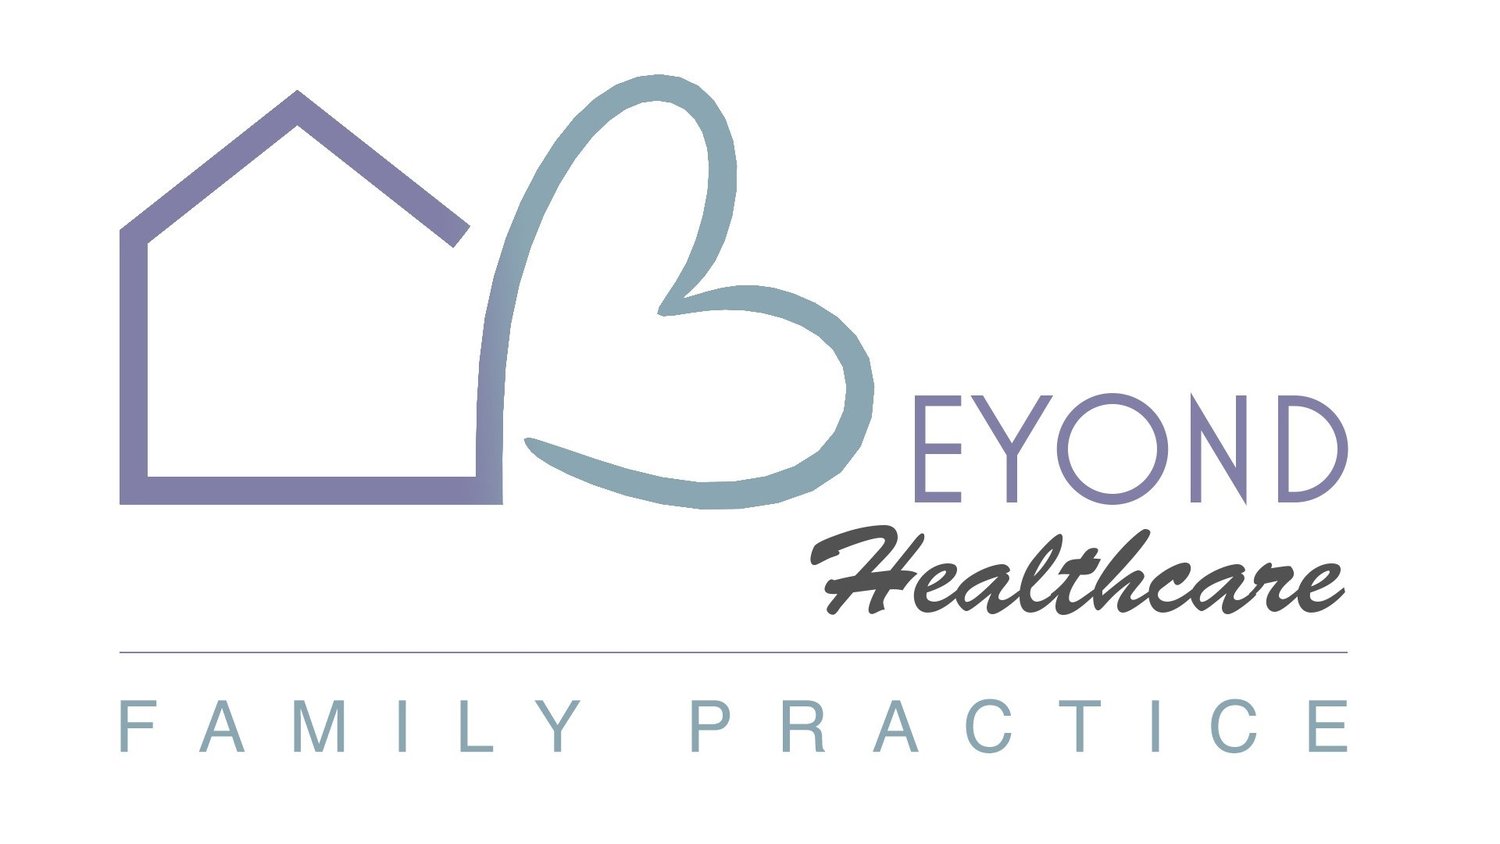 Beyond Healthcare Family Practice